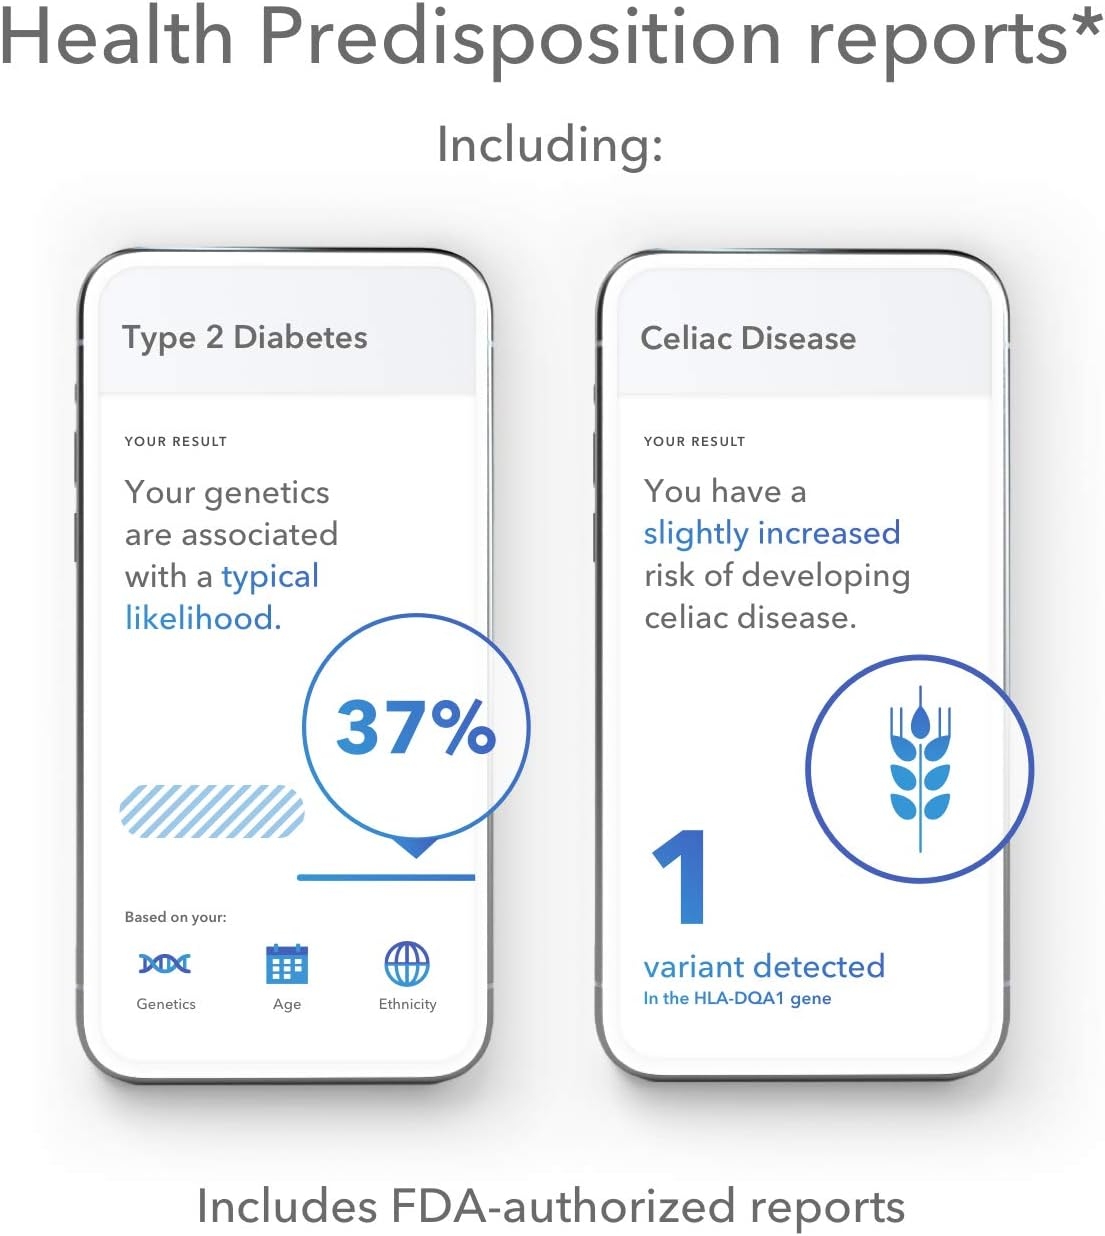 23andMe Health + Ancestry Service: Personal Genetic DNA Test Including Health Predispositions, Carrier Status, Wellness, and Trait Reports (Before You Buy See Important Test Info Below)